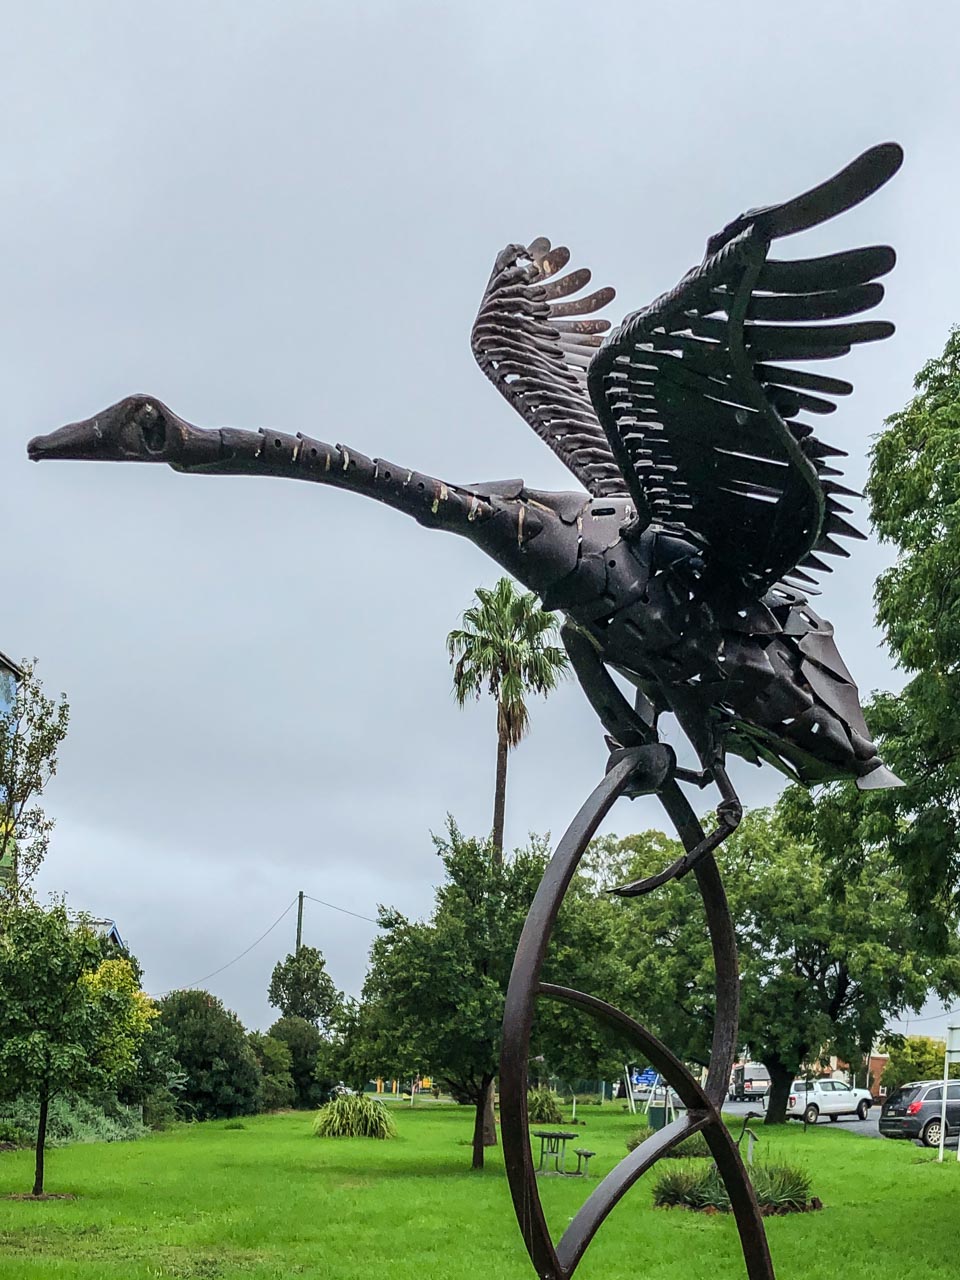 A sculpture in a park of a black swan made from recycled metal